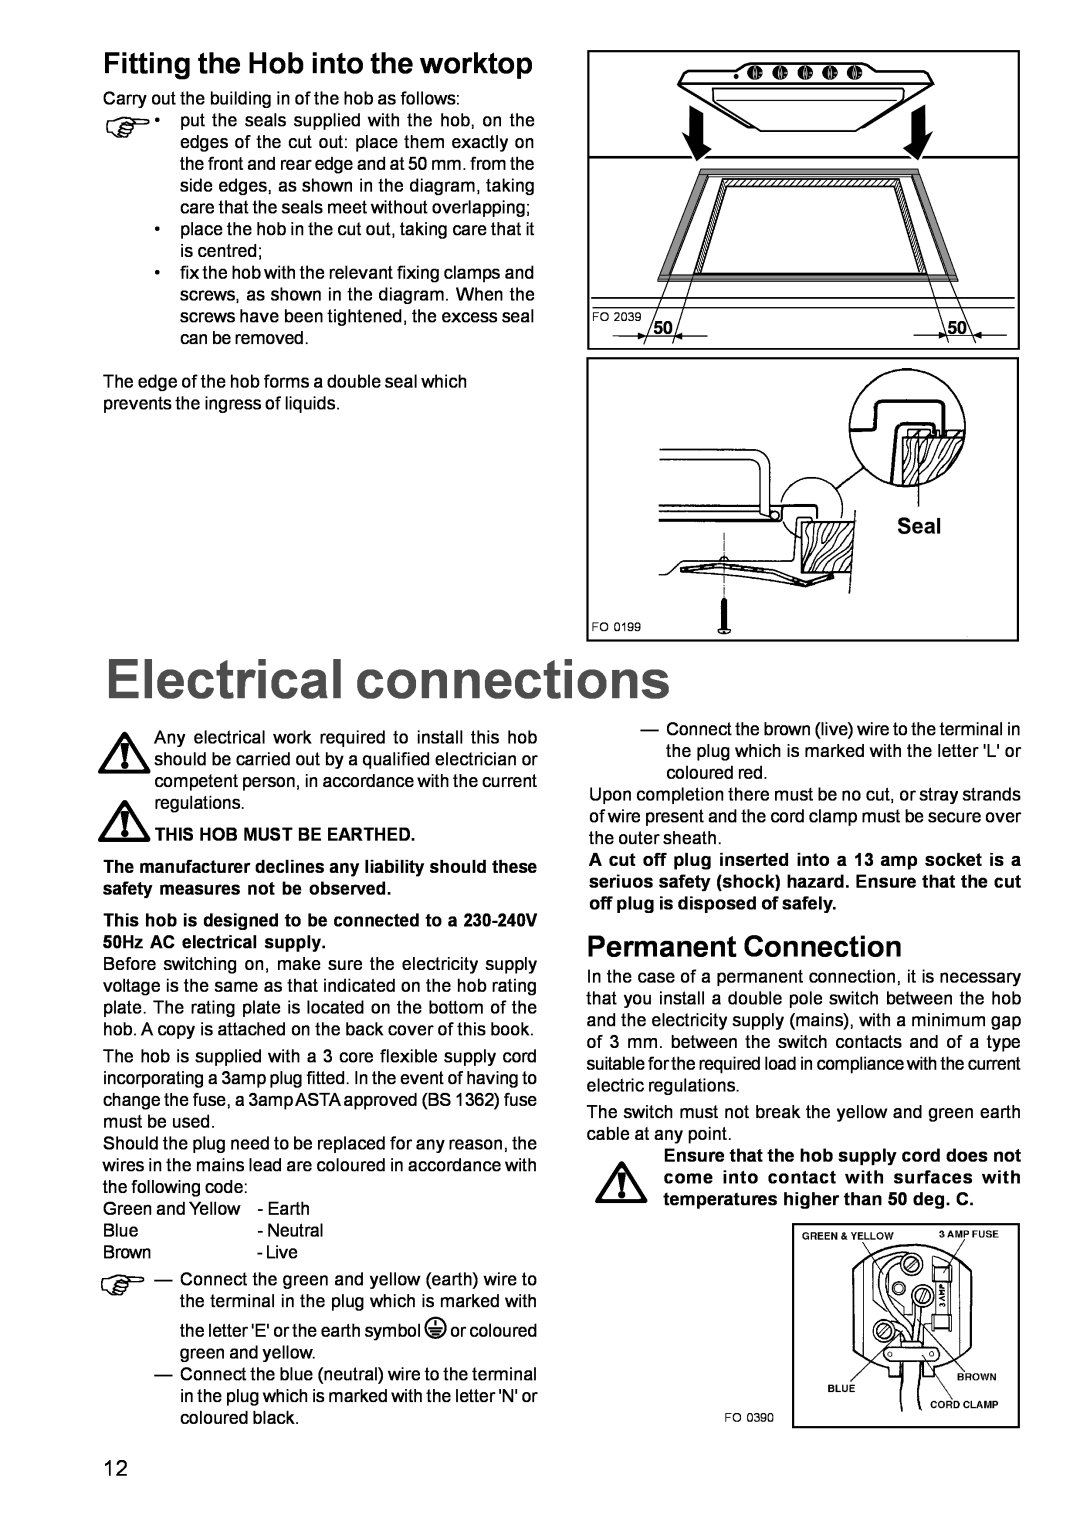 Tricity Bendix TBG 750 manual Electrical connections, Fitting the Hob into the worktop, Permanent Connection 